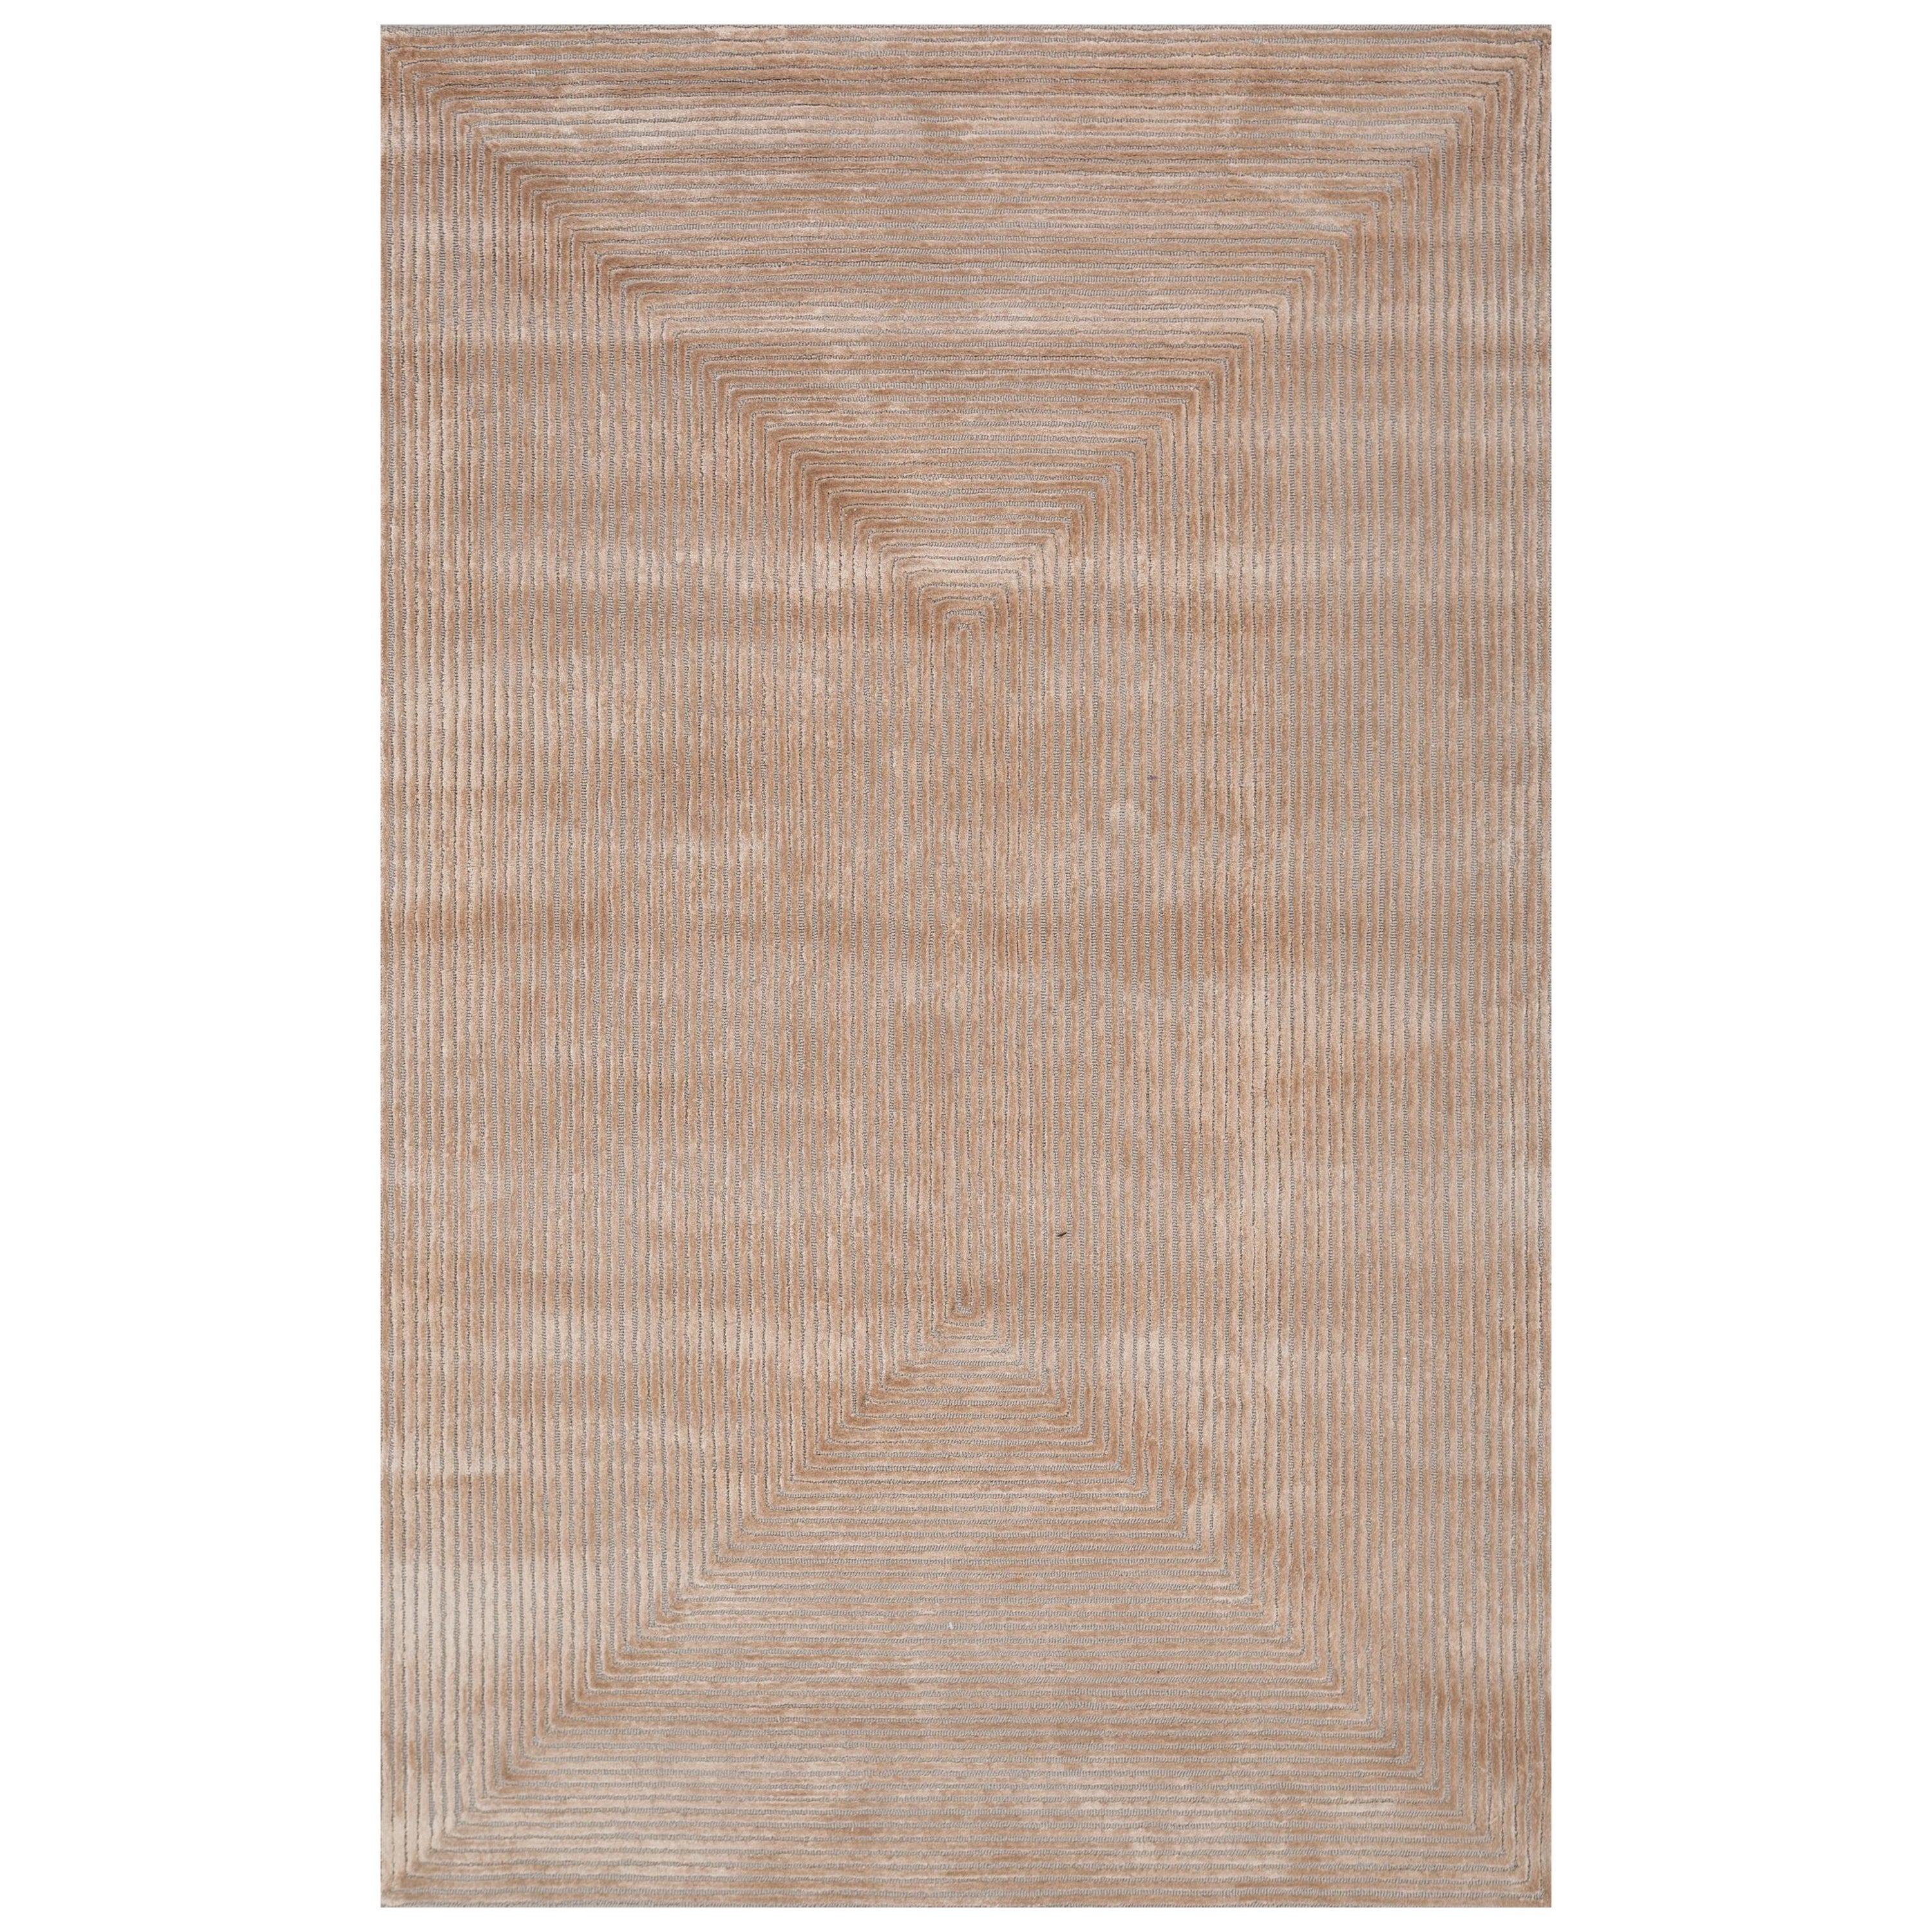 Coral Waltz Classic Gray & Pink Tint 240x300 cm Hand Tufted Rug